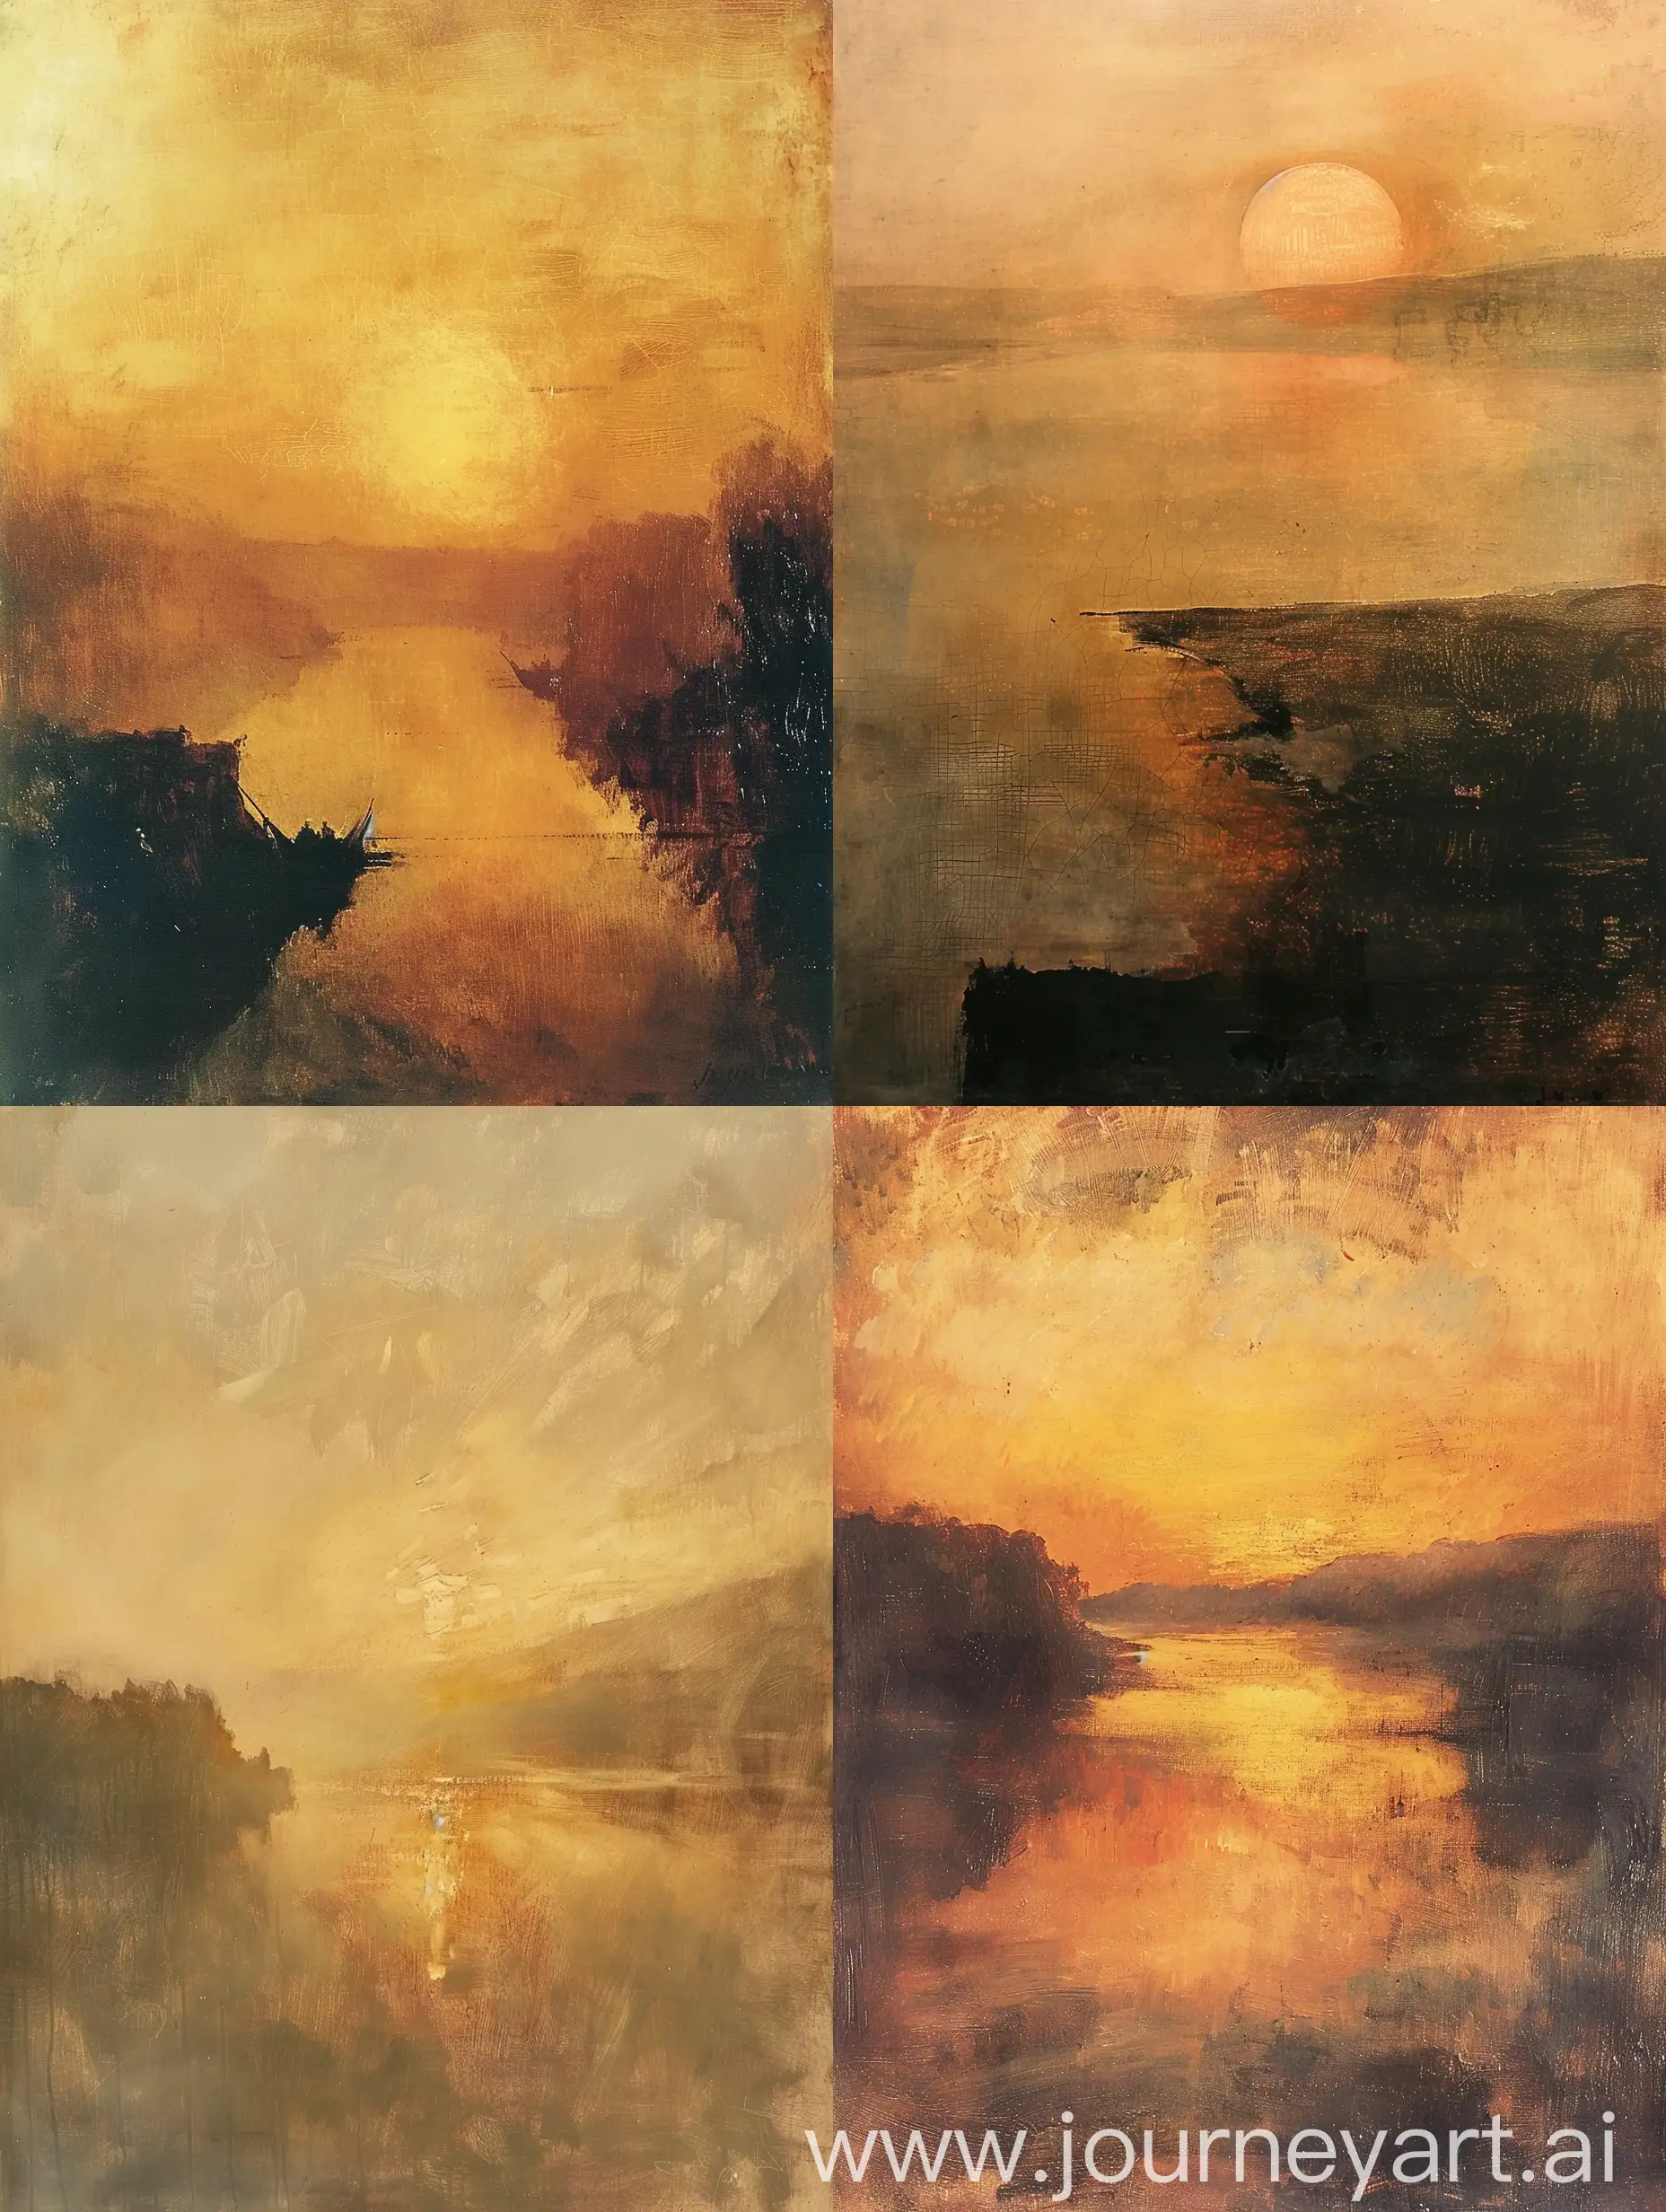 A stunning minimalist painting Sunset landscape by J. M. W Turner Imagine, The overall effect is a harmonious blend of natural and man-made elements, creating a serene and thought-provoking piece of art."